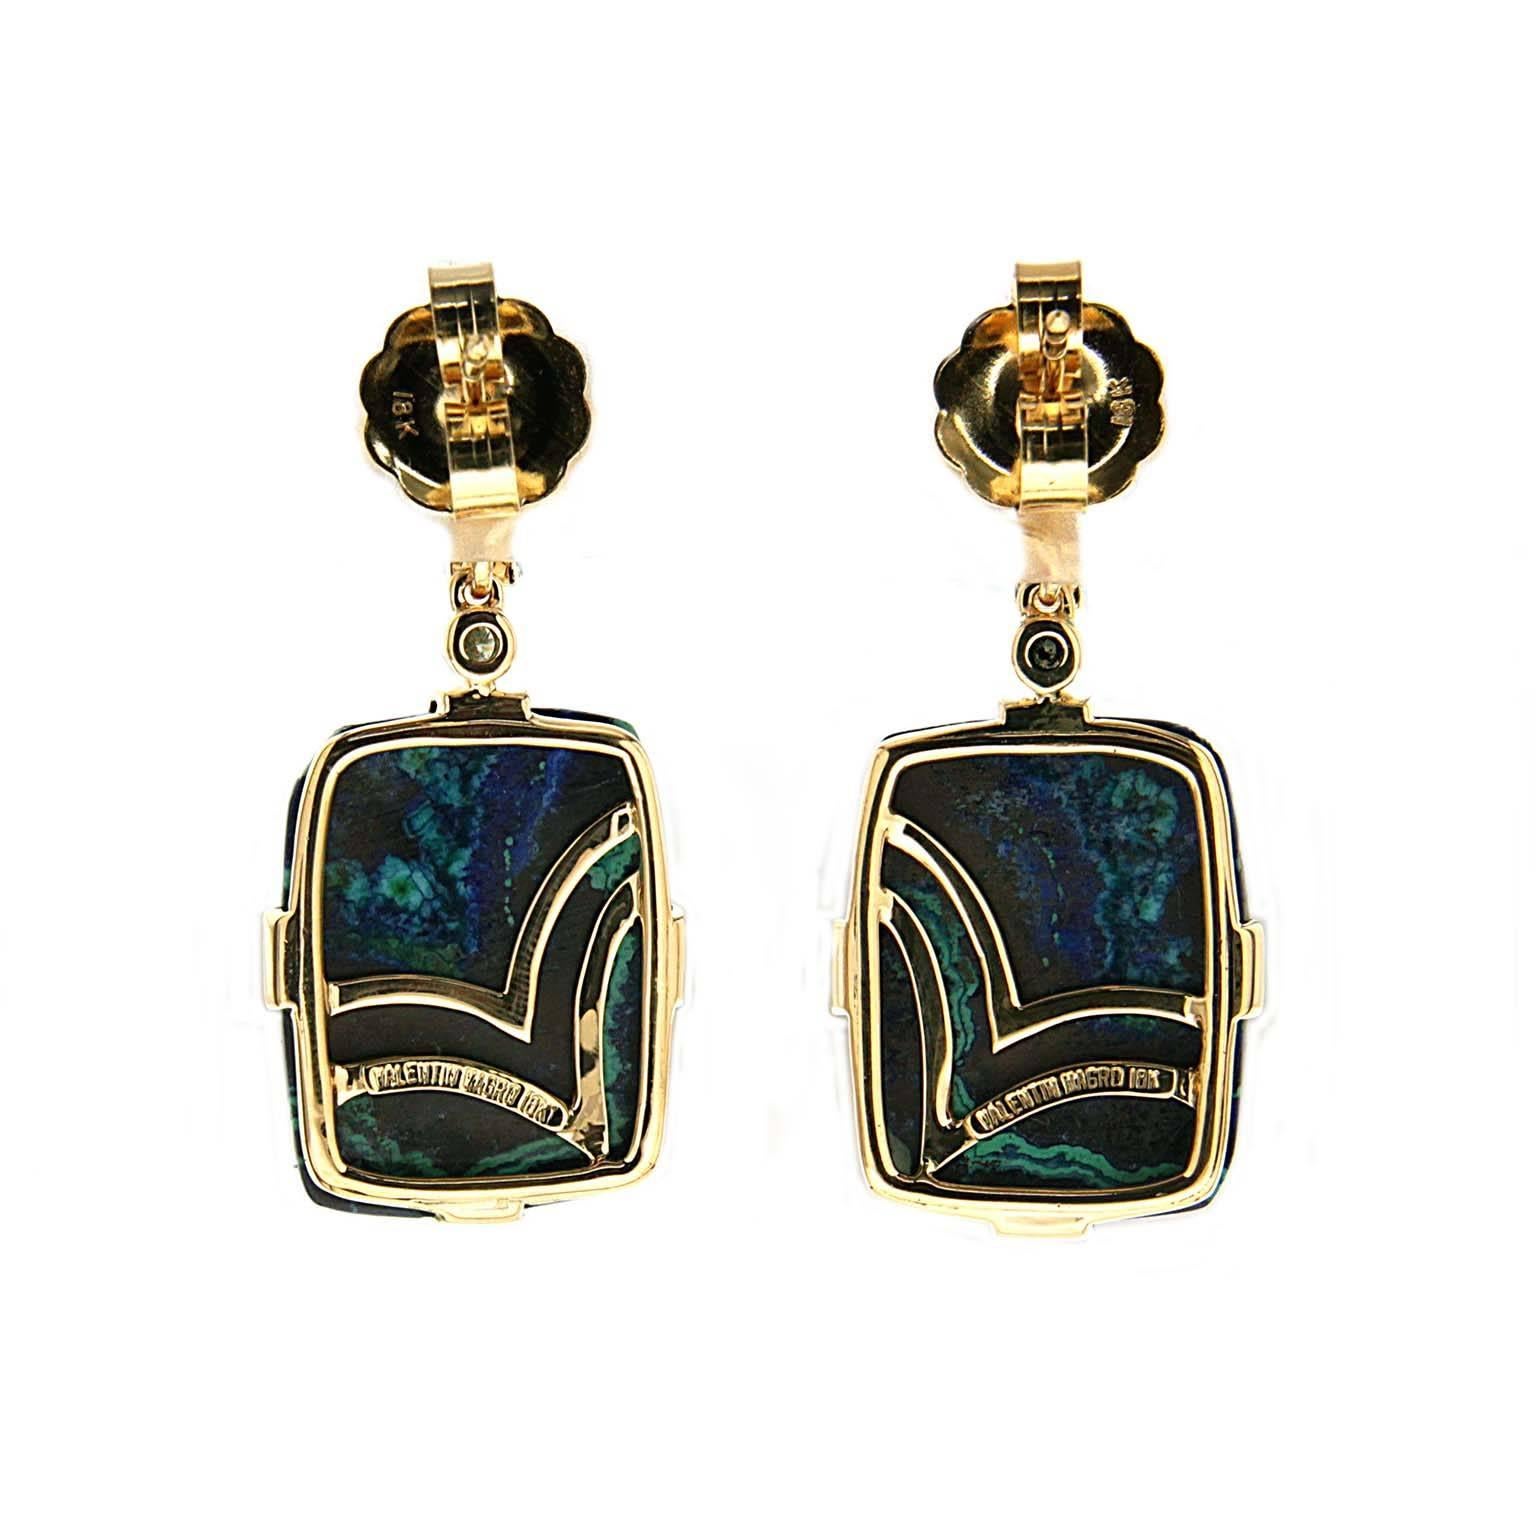 These lovely earrings feature blue cushion Topaz and trapezoid Azurite Malachite with rectangle pave motif in 18kt yellow gold. They are finished with clip-backs (post can be added upon request).